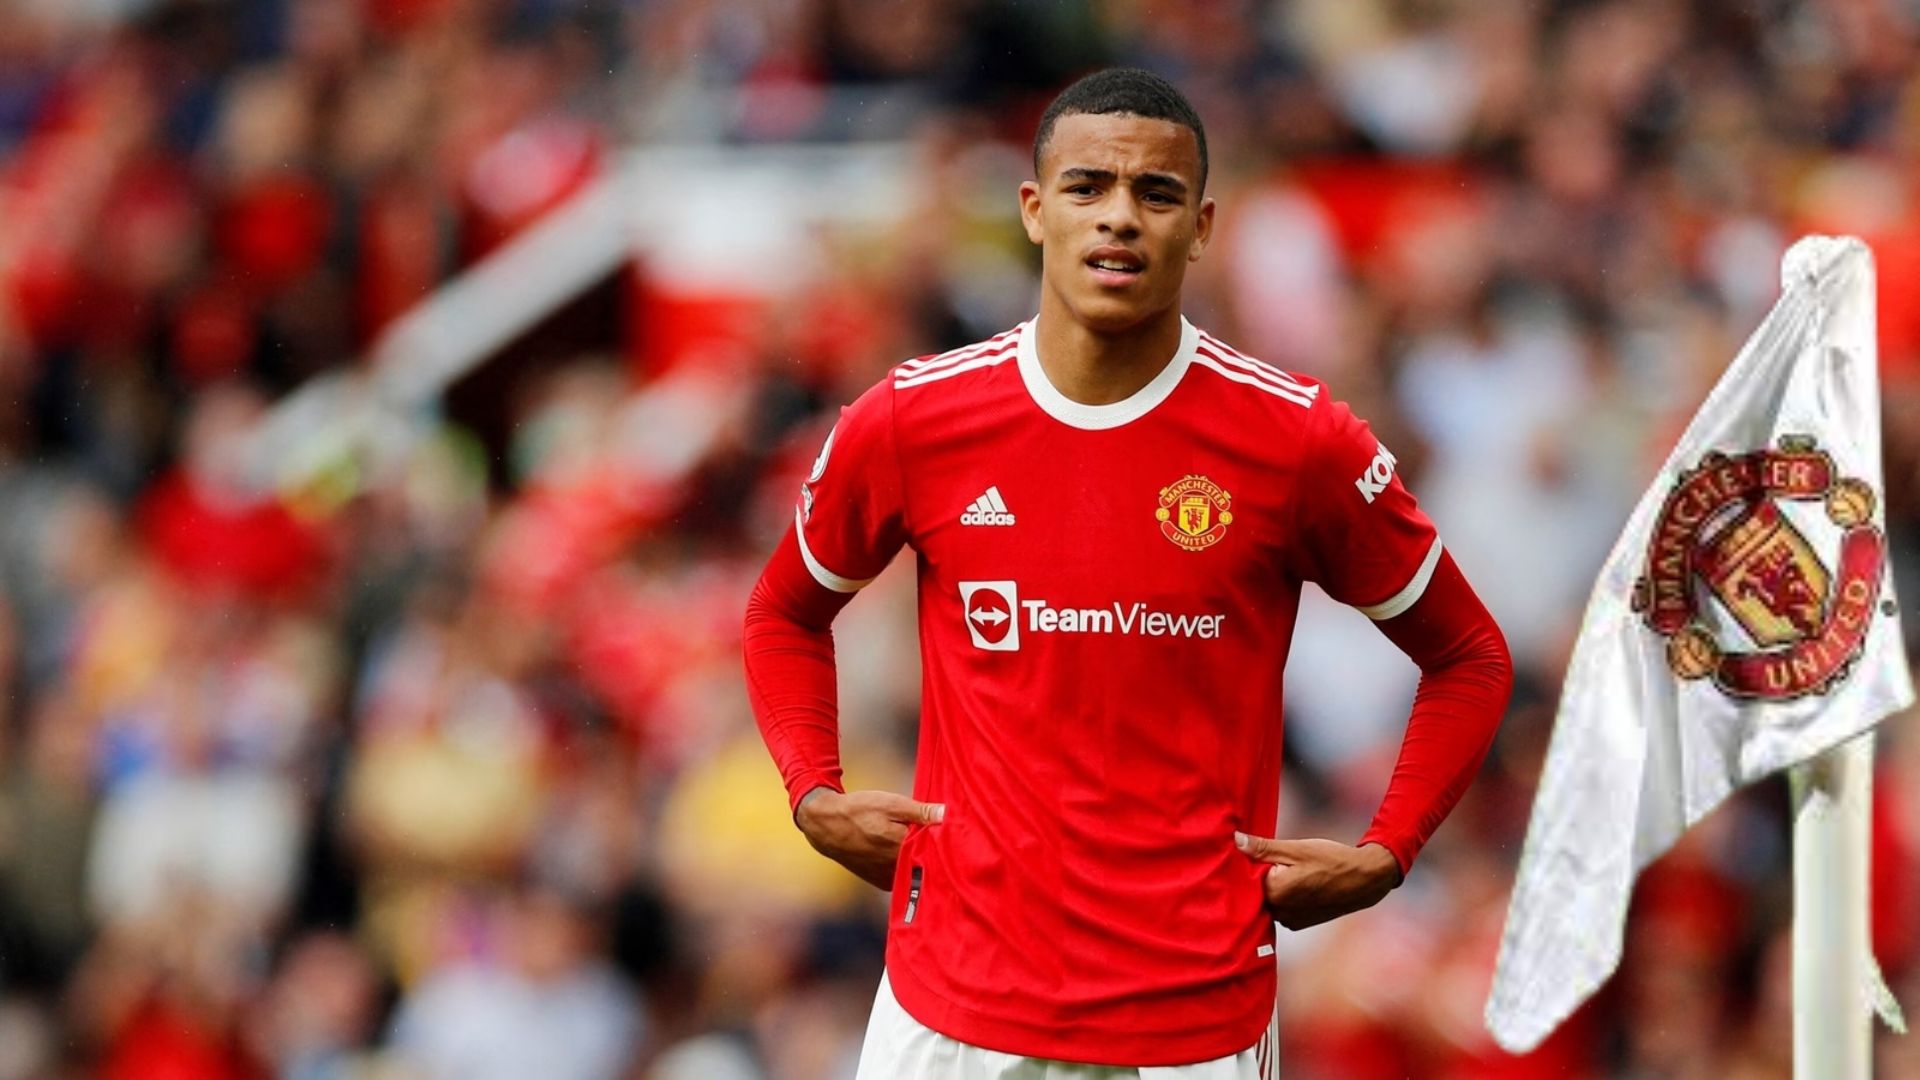 Three things which will occur if Man United brings back Greenwood